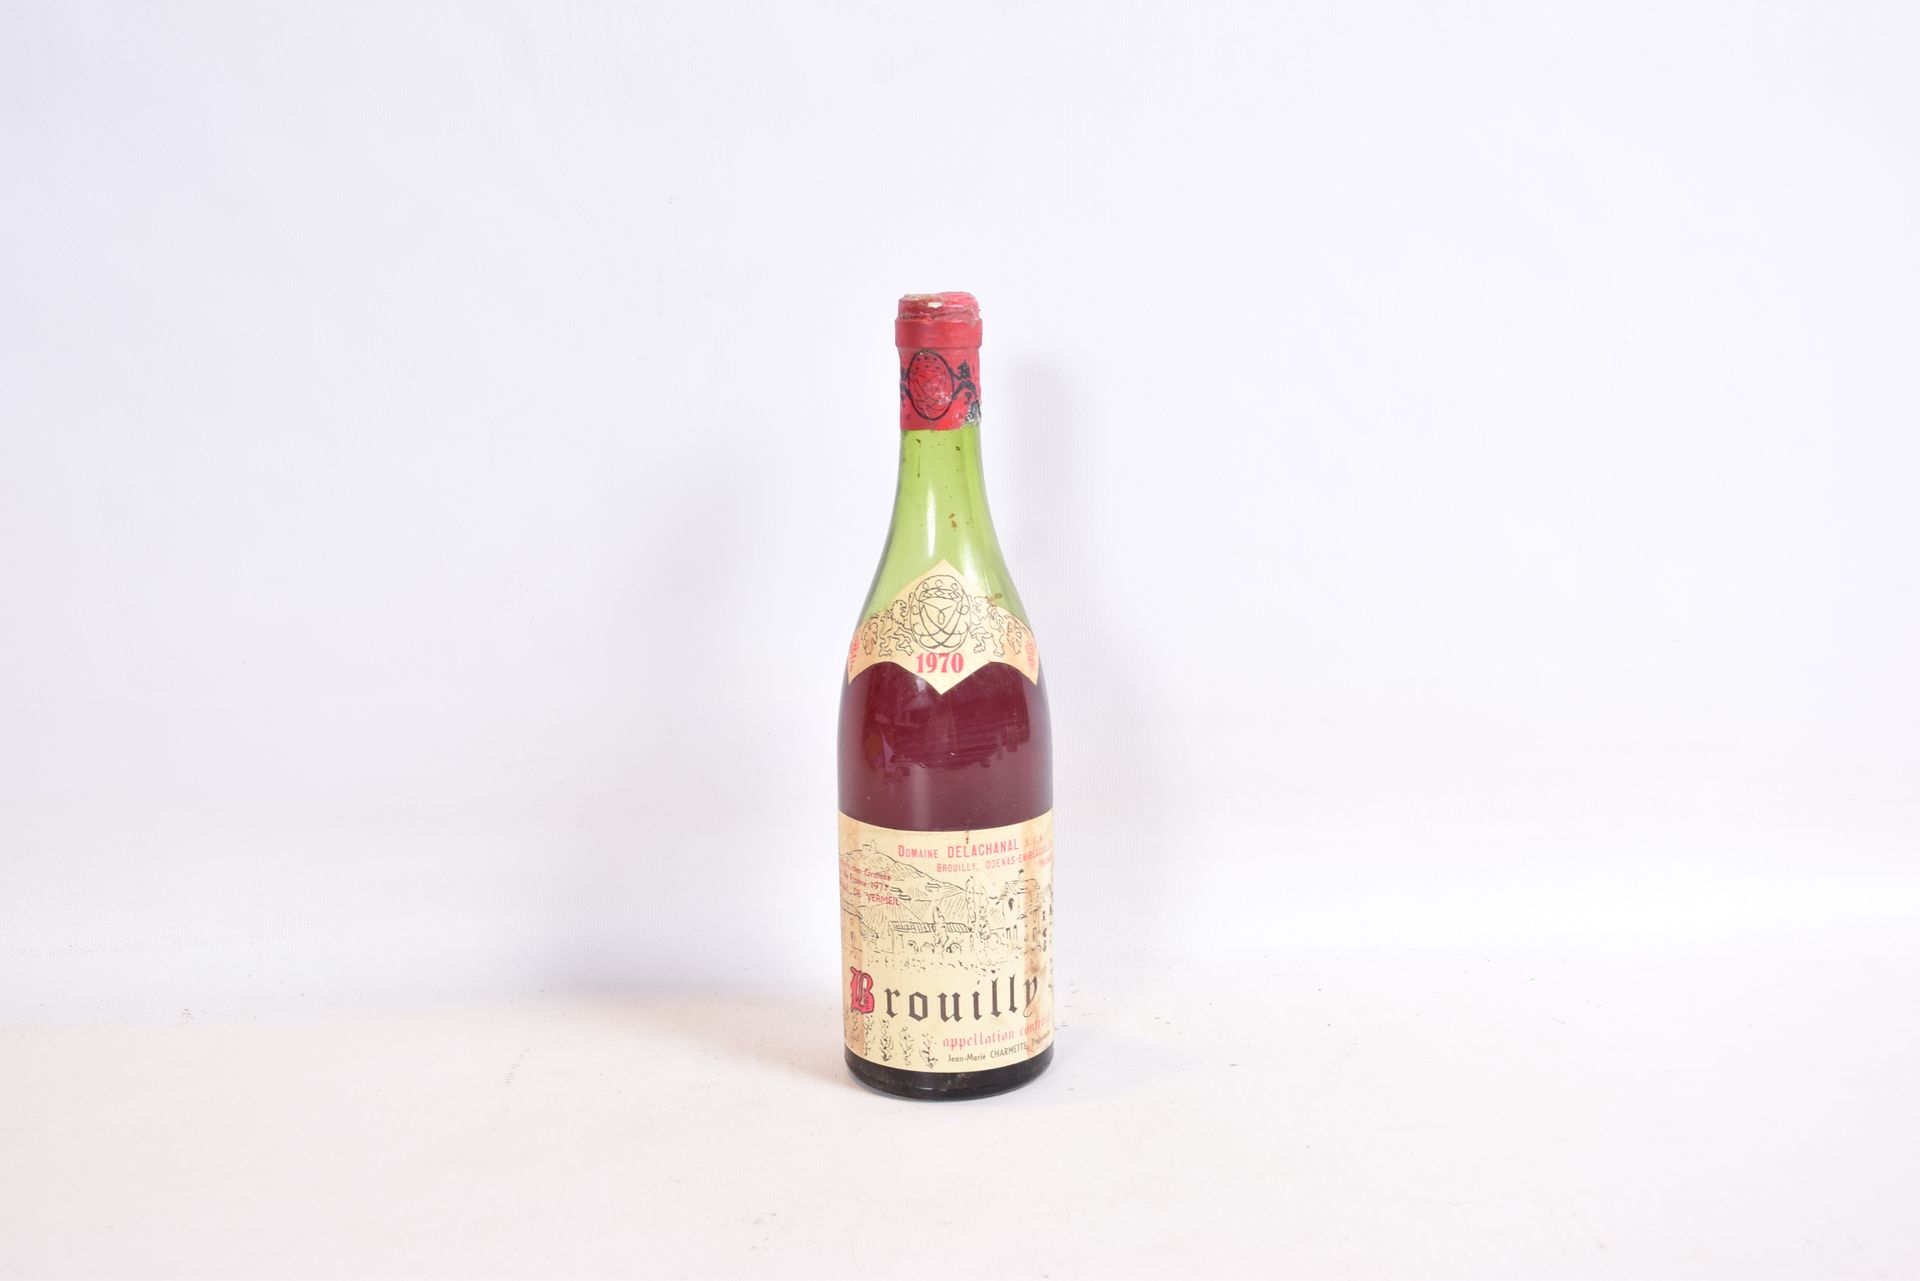 Null 1 BELLE BROUILLY Domaine Delachanal mise Charmette Prop. 1970

	And. A litt&hellip;